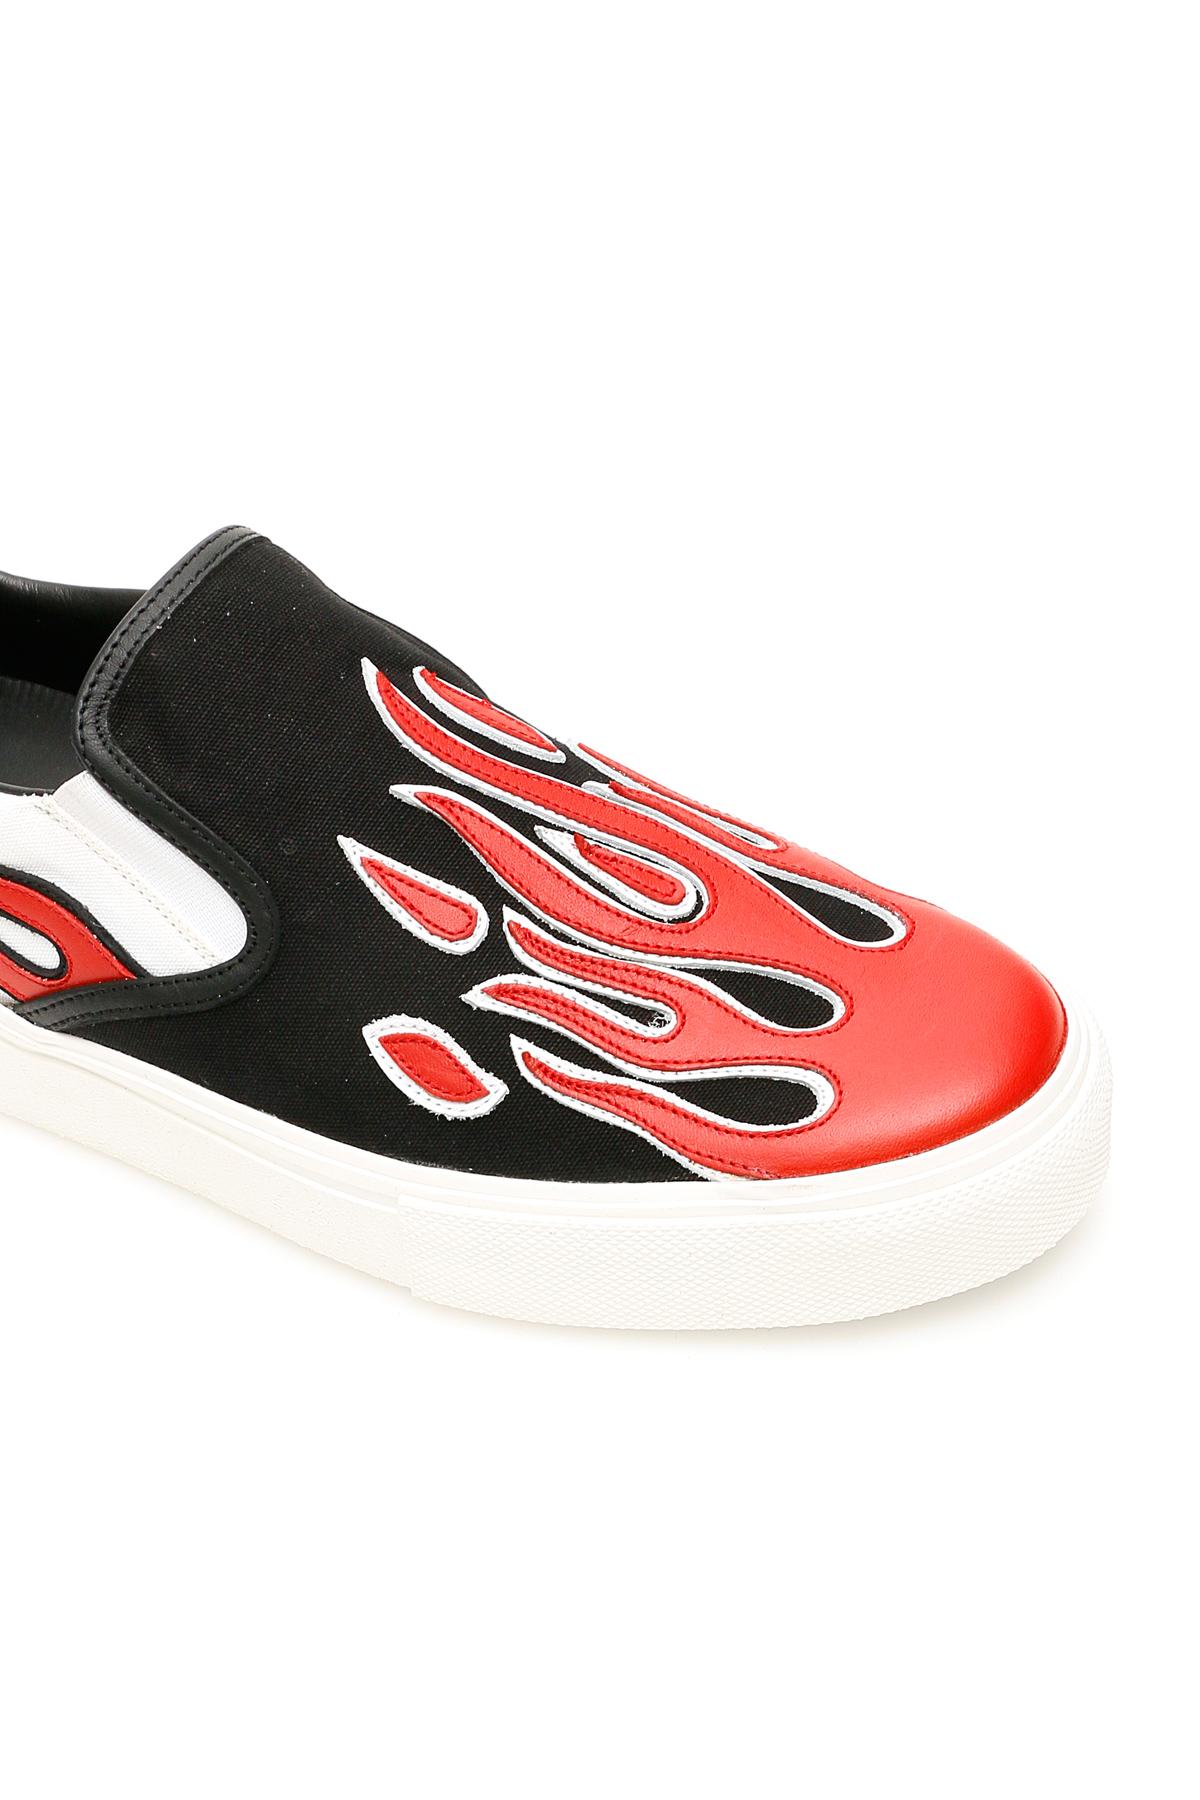 Amiri Canvas Flame Slip On in Black,Red,White (Red) for Men - Save 29% ...